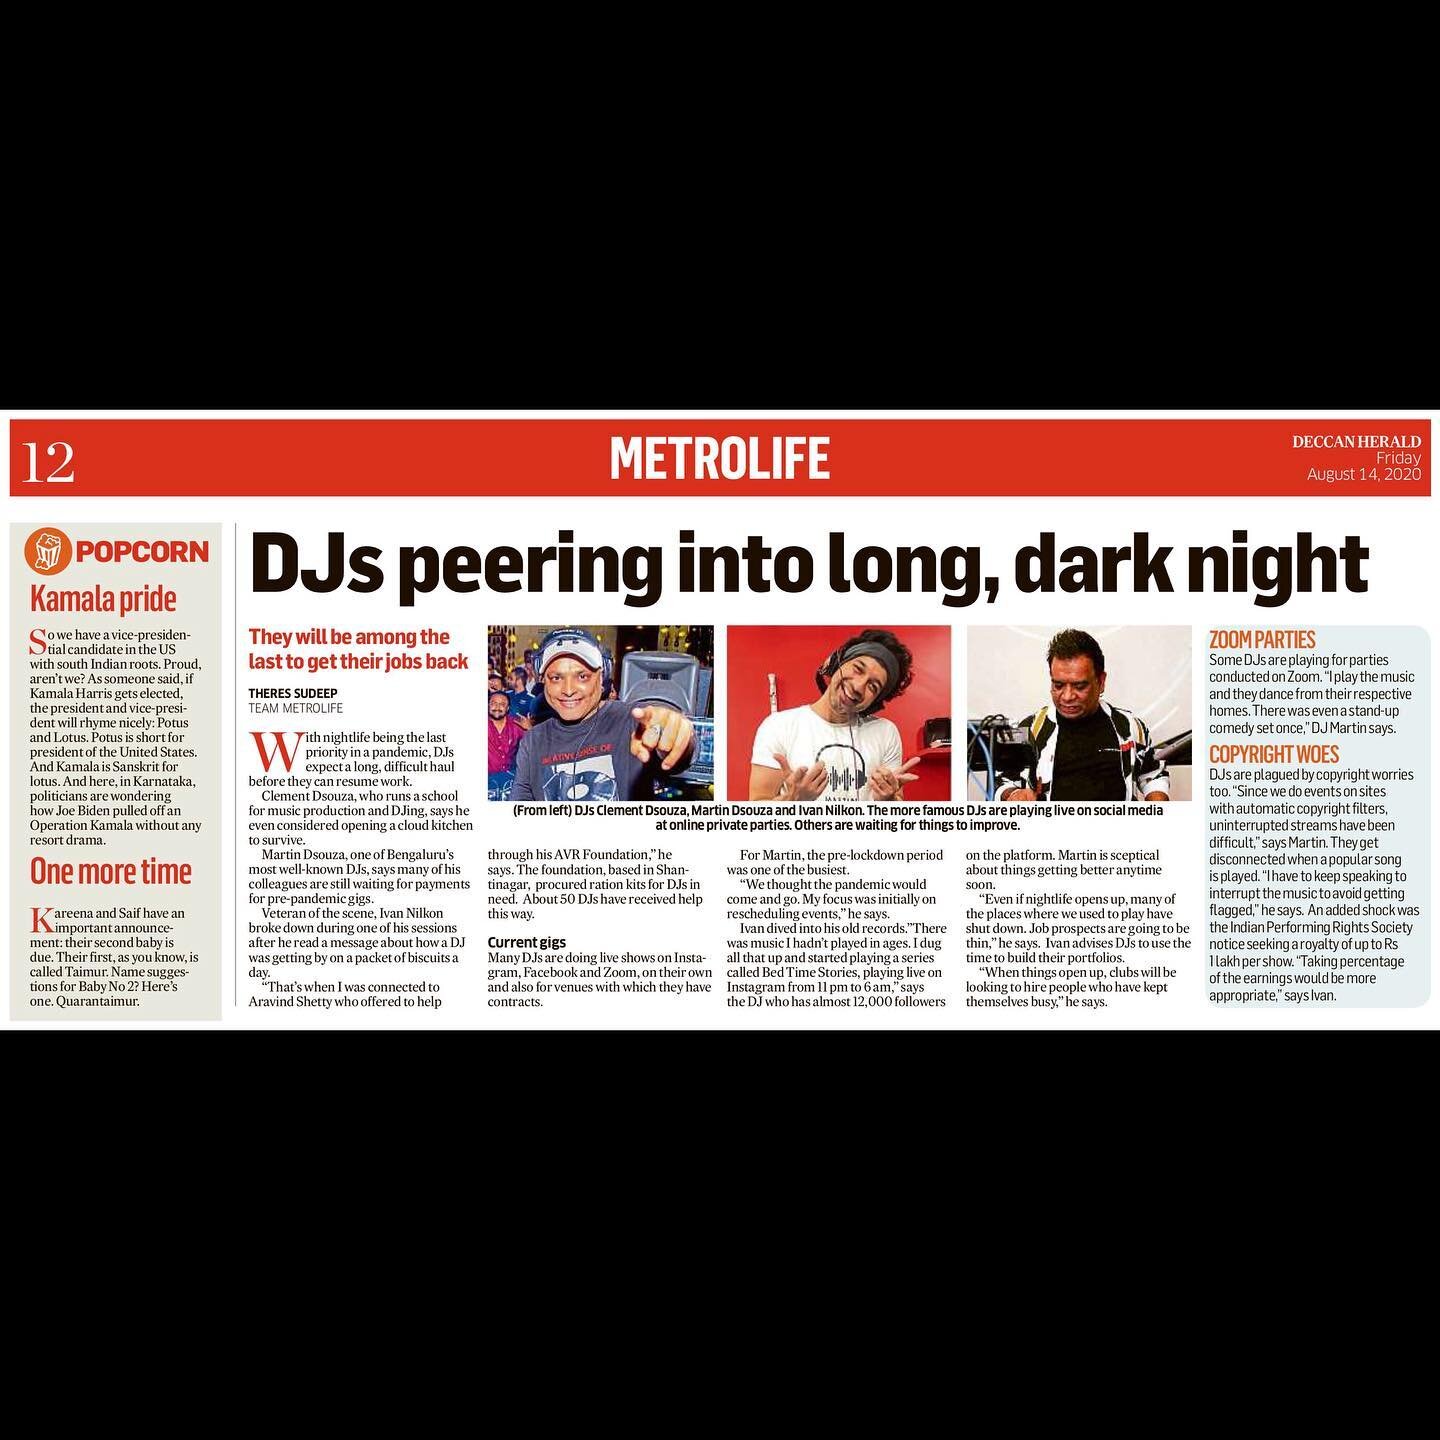 Yet the music will not stop ❤️
.
Deccan Herald - Metrolife carried out an article about the affects of the pandemic on the NightLife Industry &amp; DJs. @djivanindia, @djclementdsouza &amp; I shared our thoughts about it. Do give it a read and share 